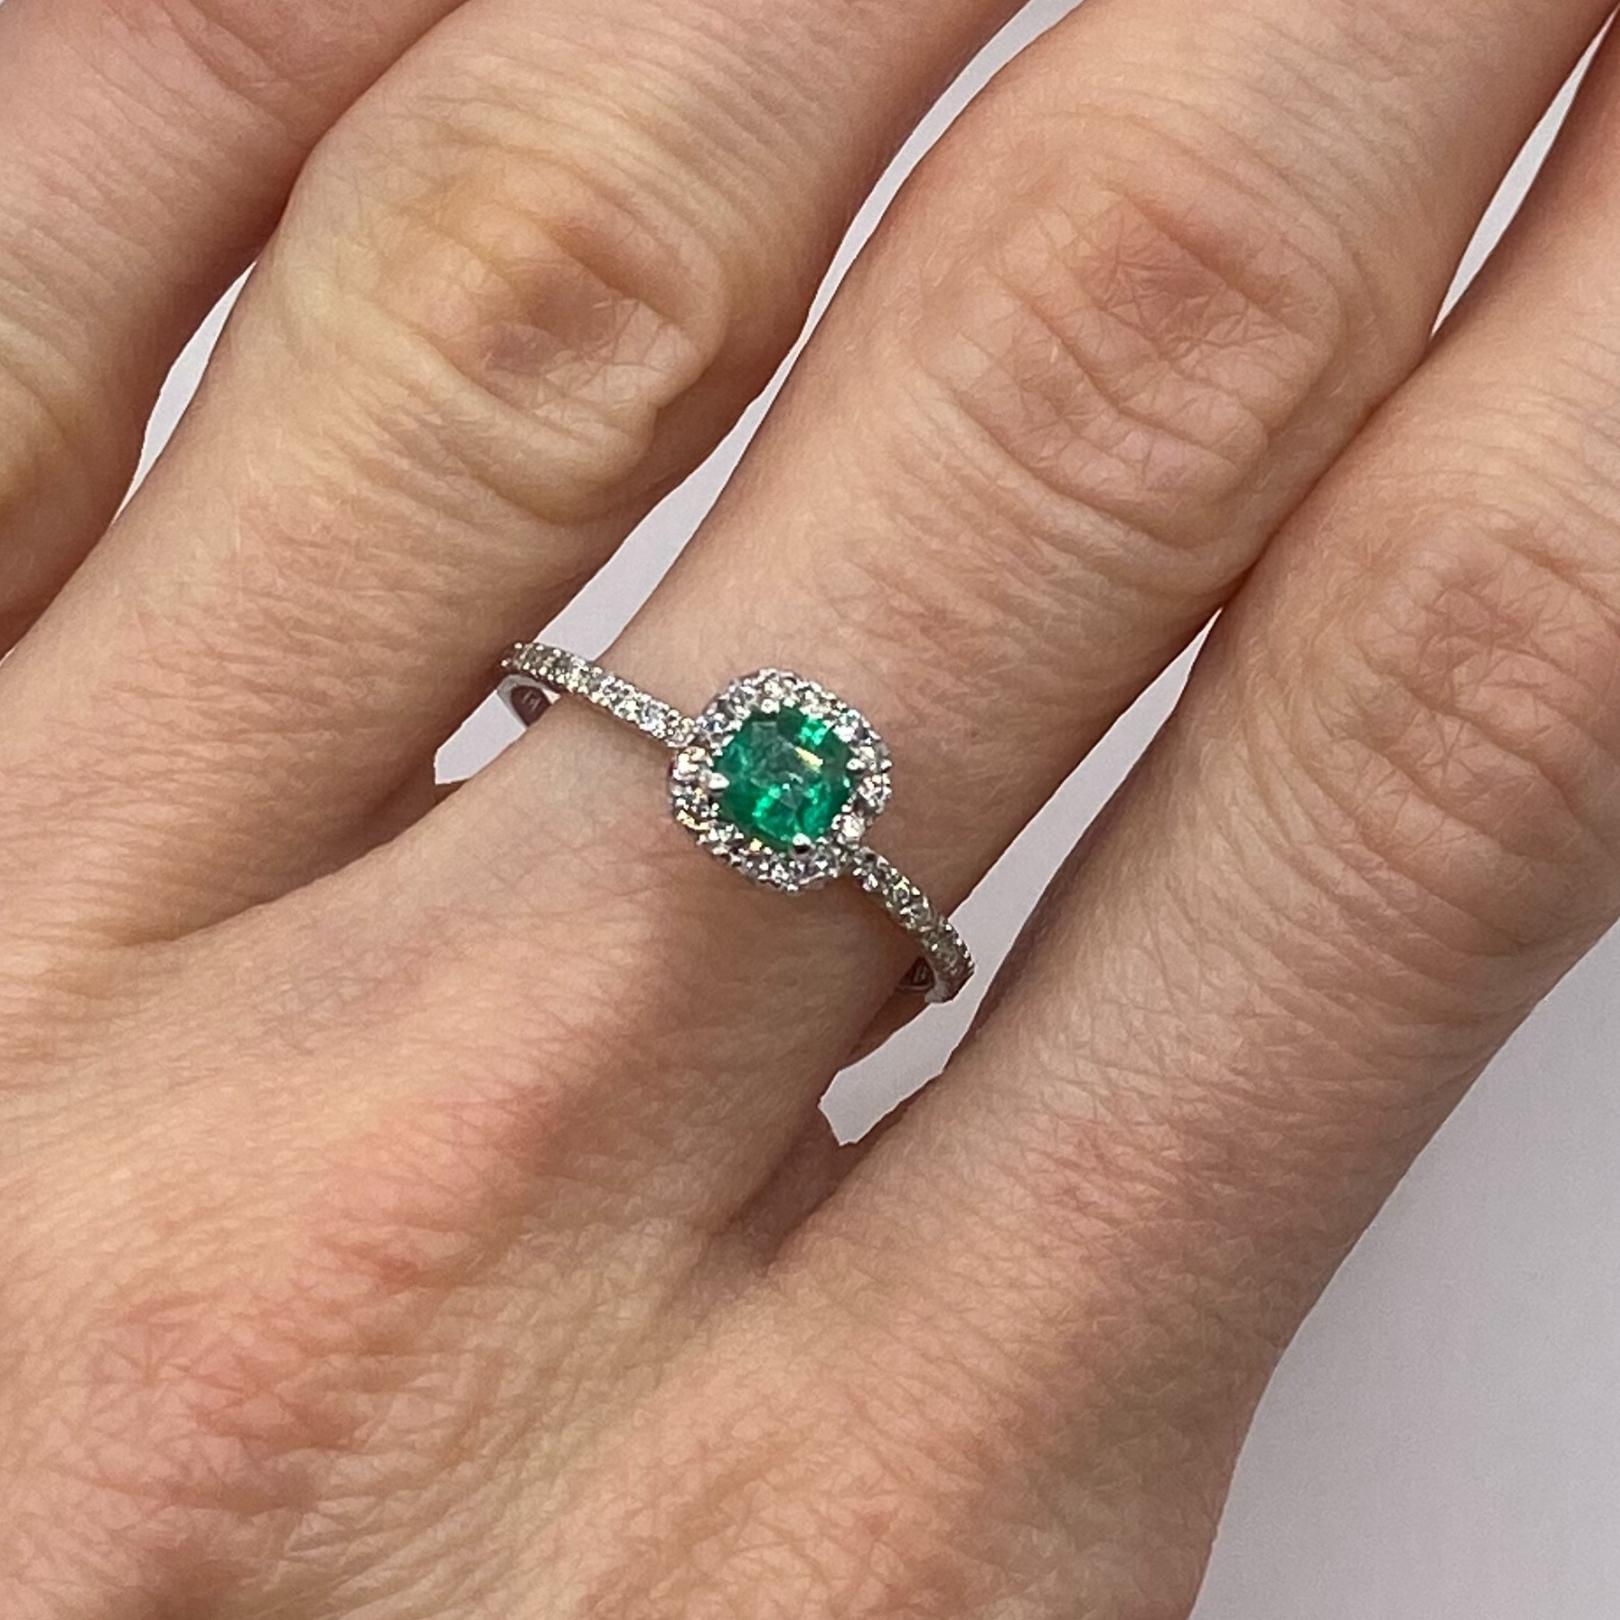 Modern 0.59ctw Cushion Cut Emerald & Round Diamond Petite Ring in 14KT White Gold For Sale